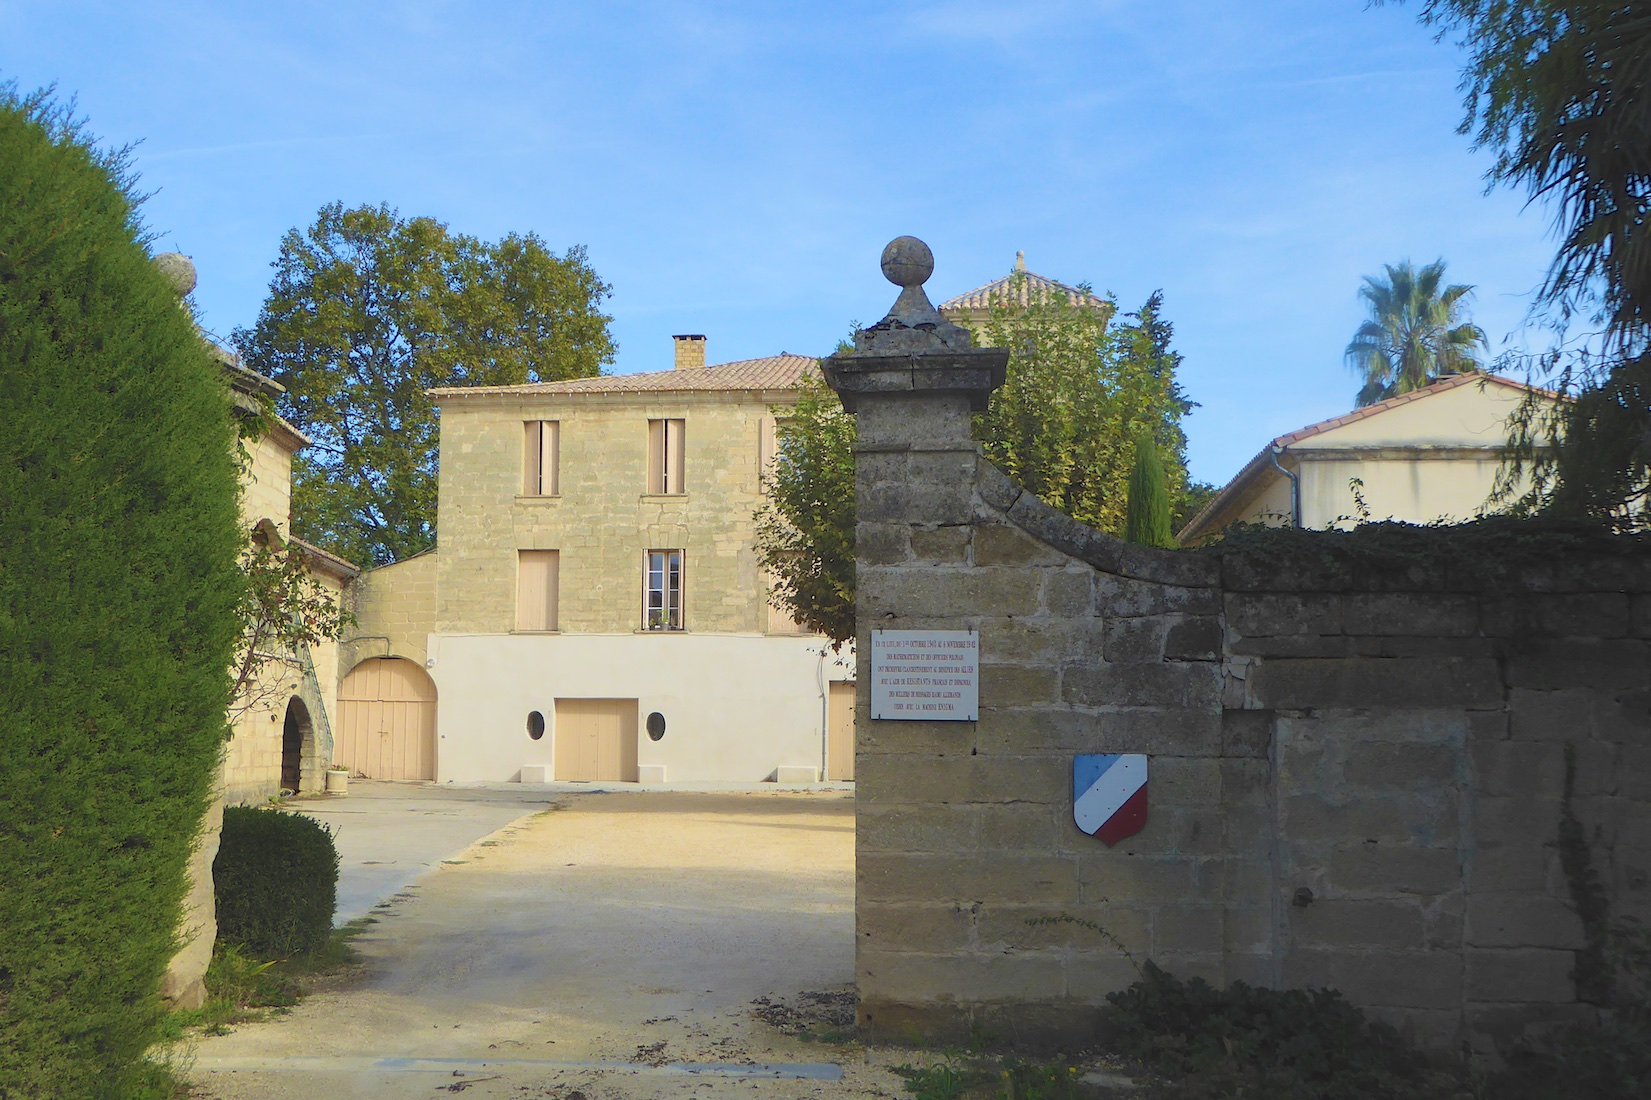 Entrance to Château des Fouzes, Uzes, France, hoem to the Polish code breakers who cracked Enigma in 1932